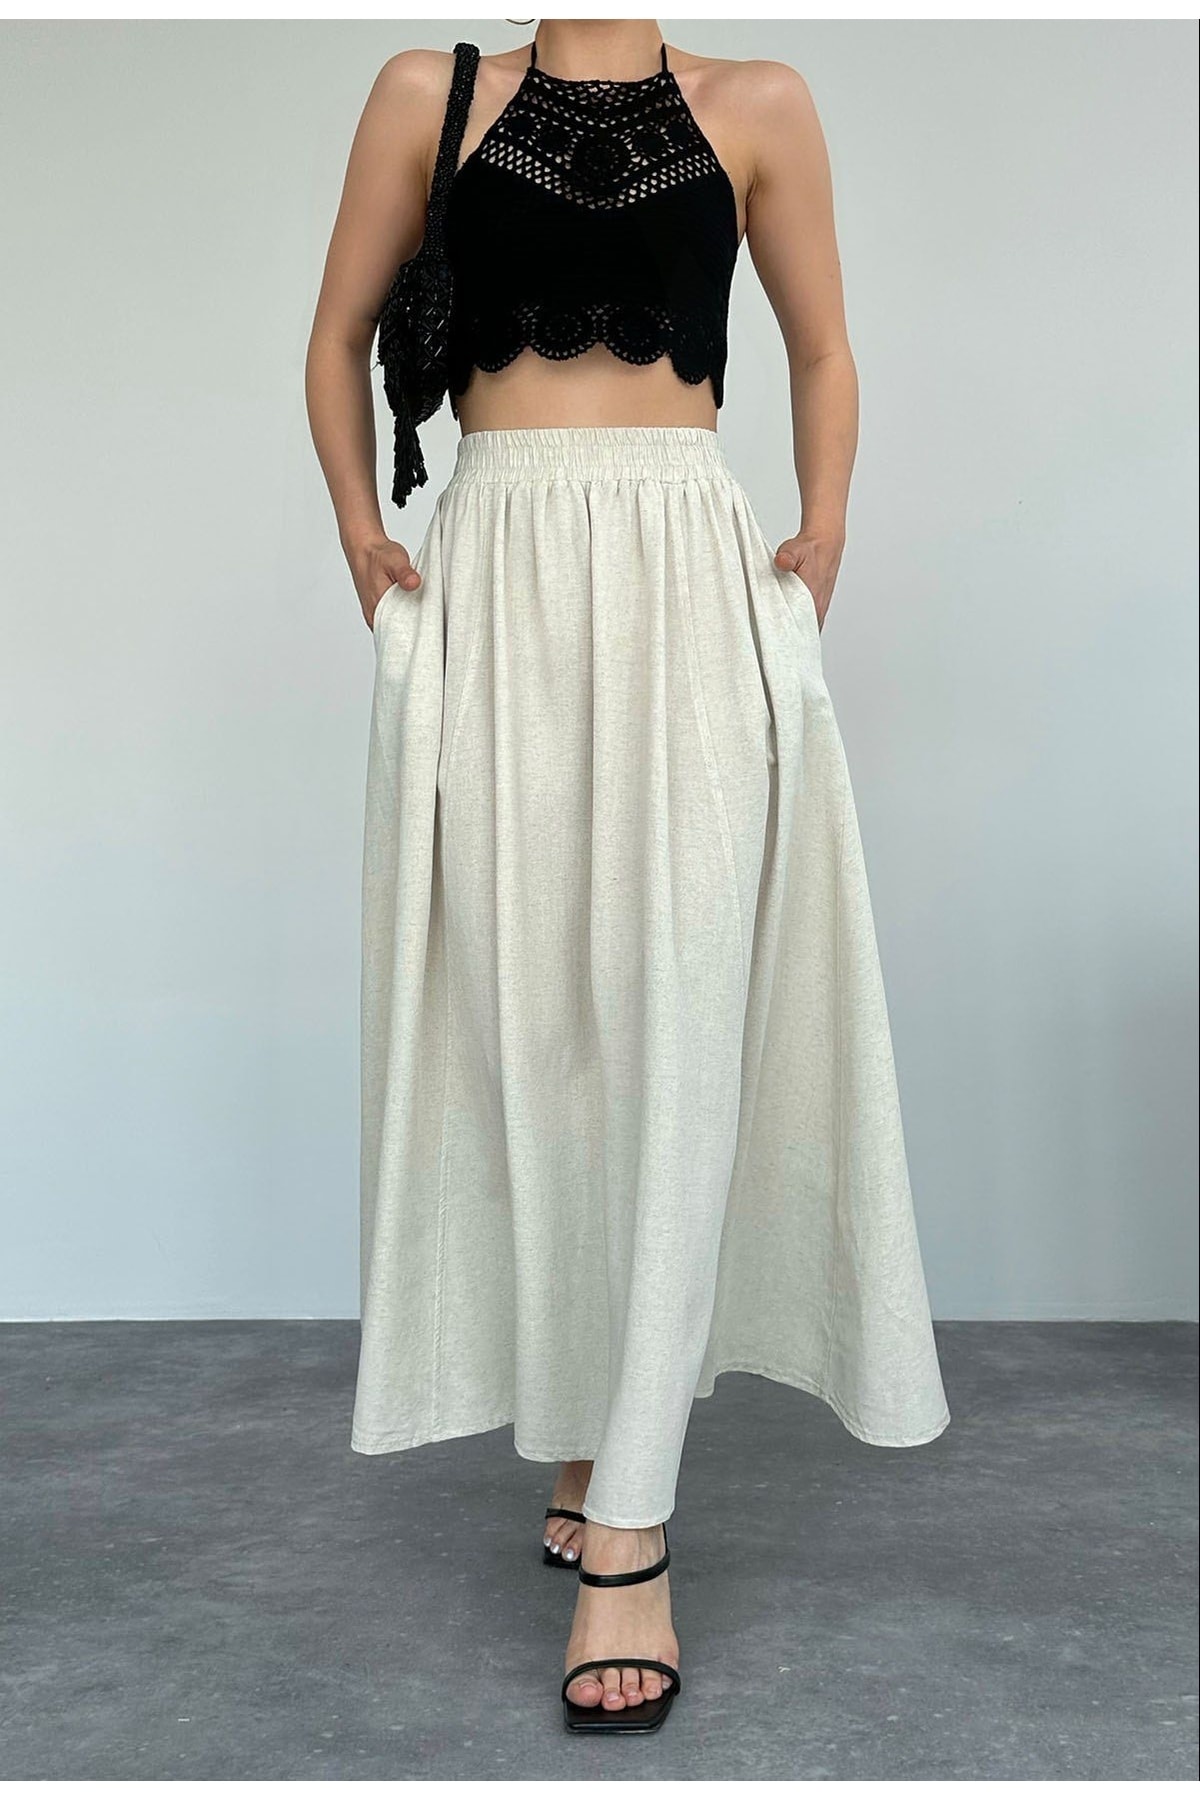 Laluvia Beige Pocketed Linen Skirt with Elastic Waist